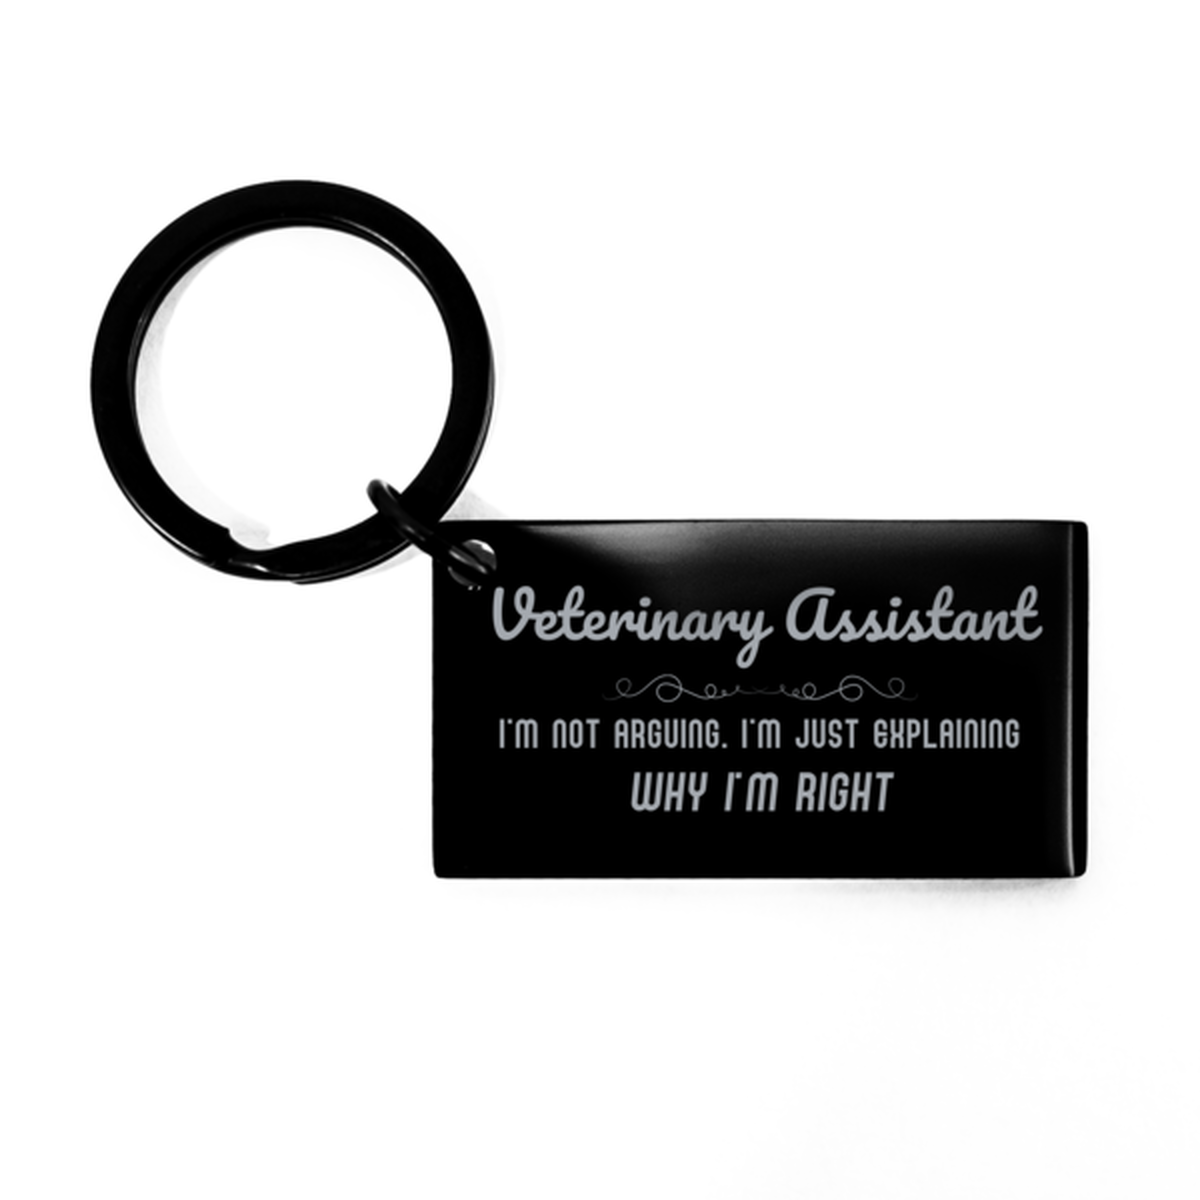 Veterinary Assistant I'm not Arguing. I'm Just Explaining Why I'm RIGHT Keychain, Funny Saying Quote Veterinary Assistant Gifts For Veterinary Assistant Graduation Birthday Christmas Gifts for Men Women Coworker